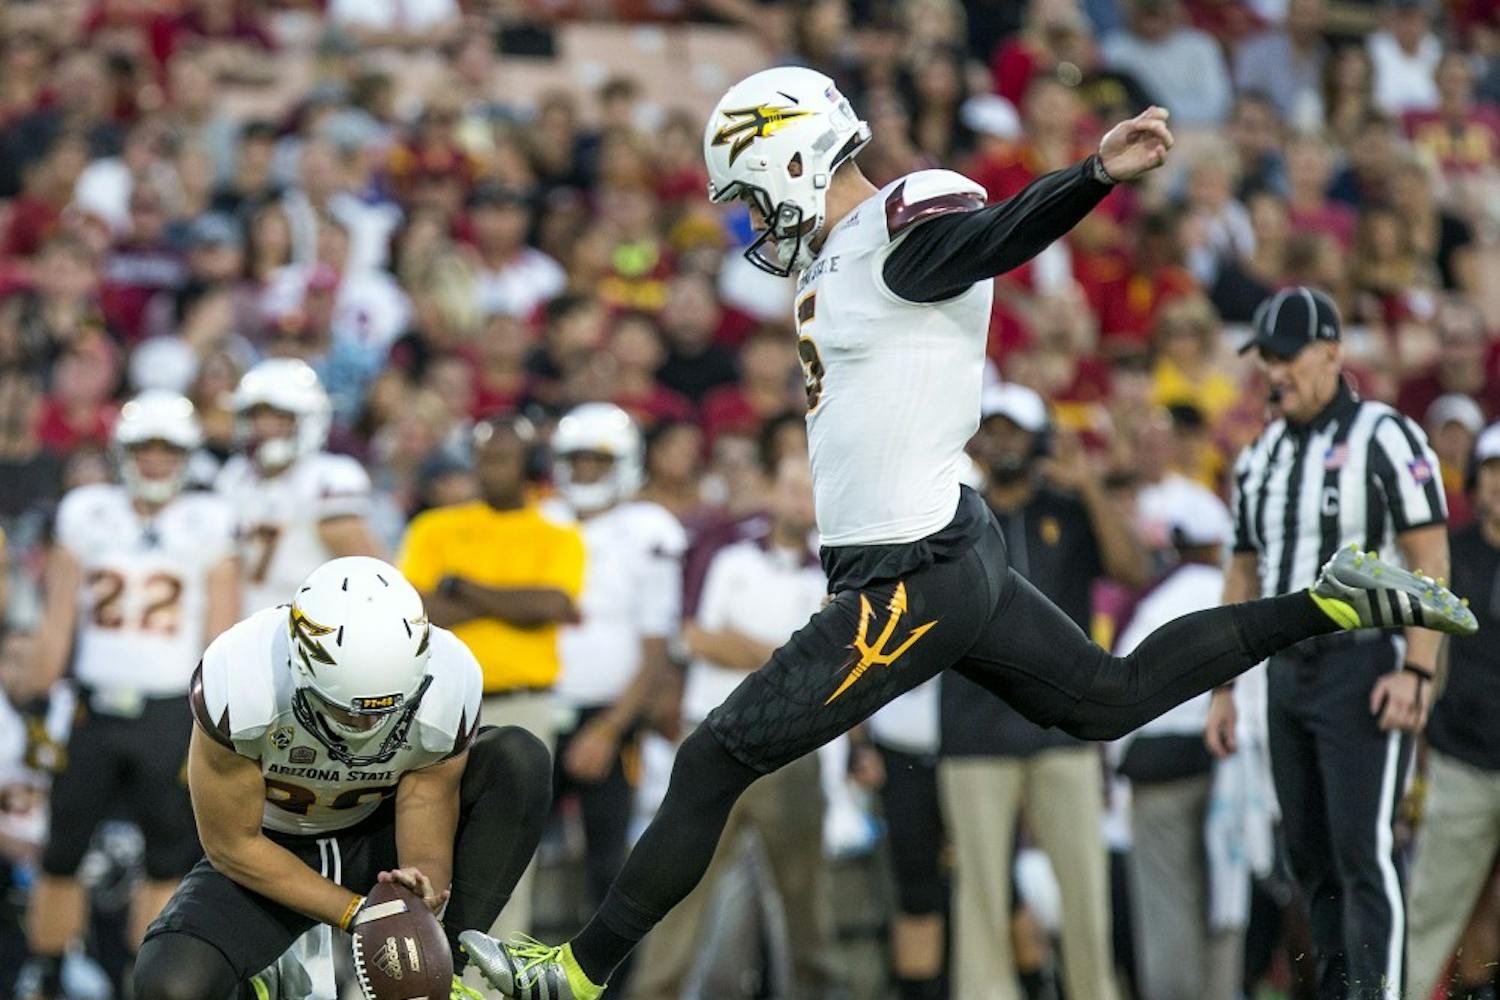 ASU Sun Devils place kicker Zane Gonzalez (5) kicks his 86th career field goal, a Pac-12 record, during a game against the USC Trojans in the Los Angeles Memorial Coliseum on Saturday, Oct. 1, 2016. 